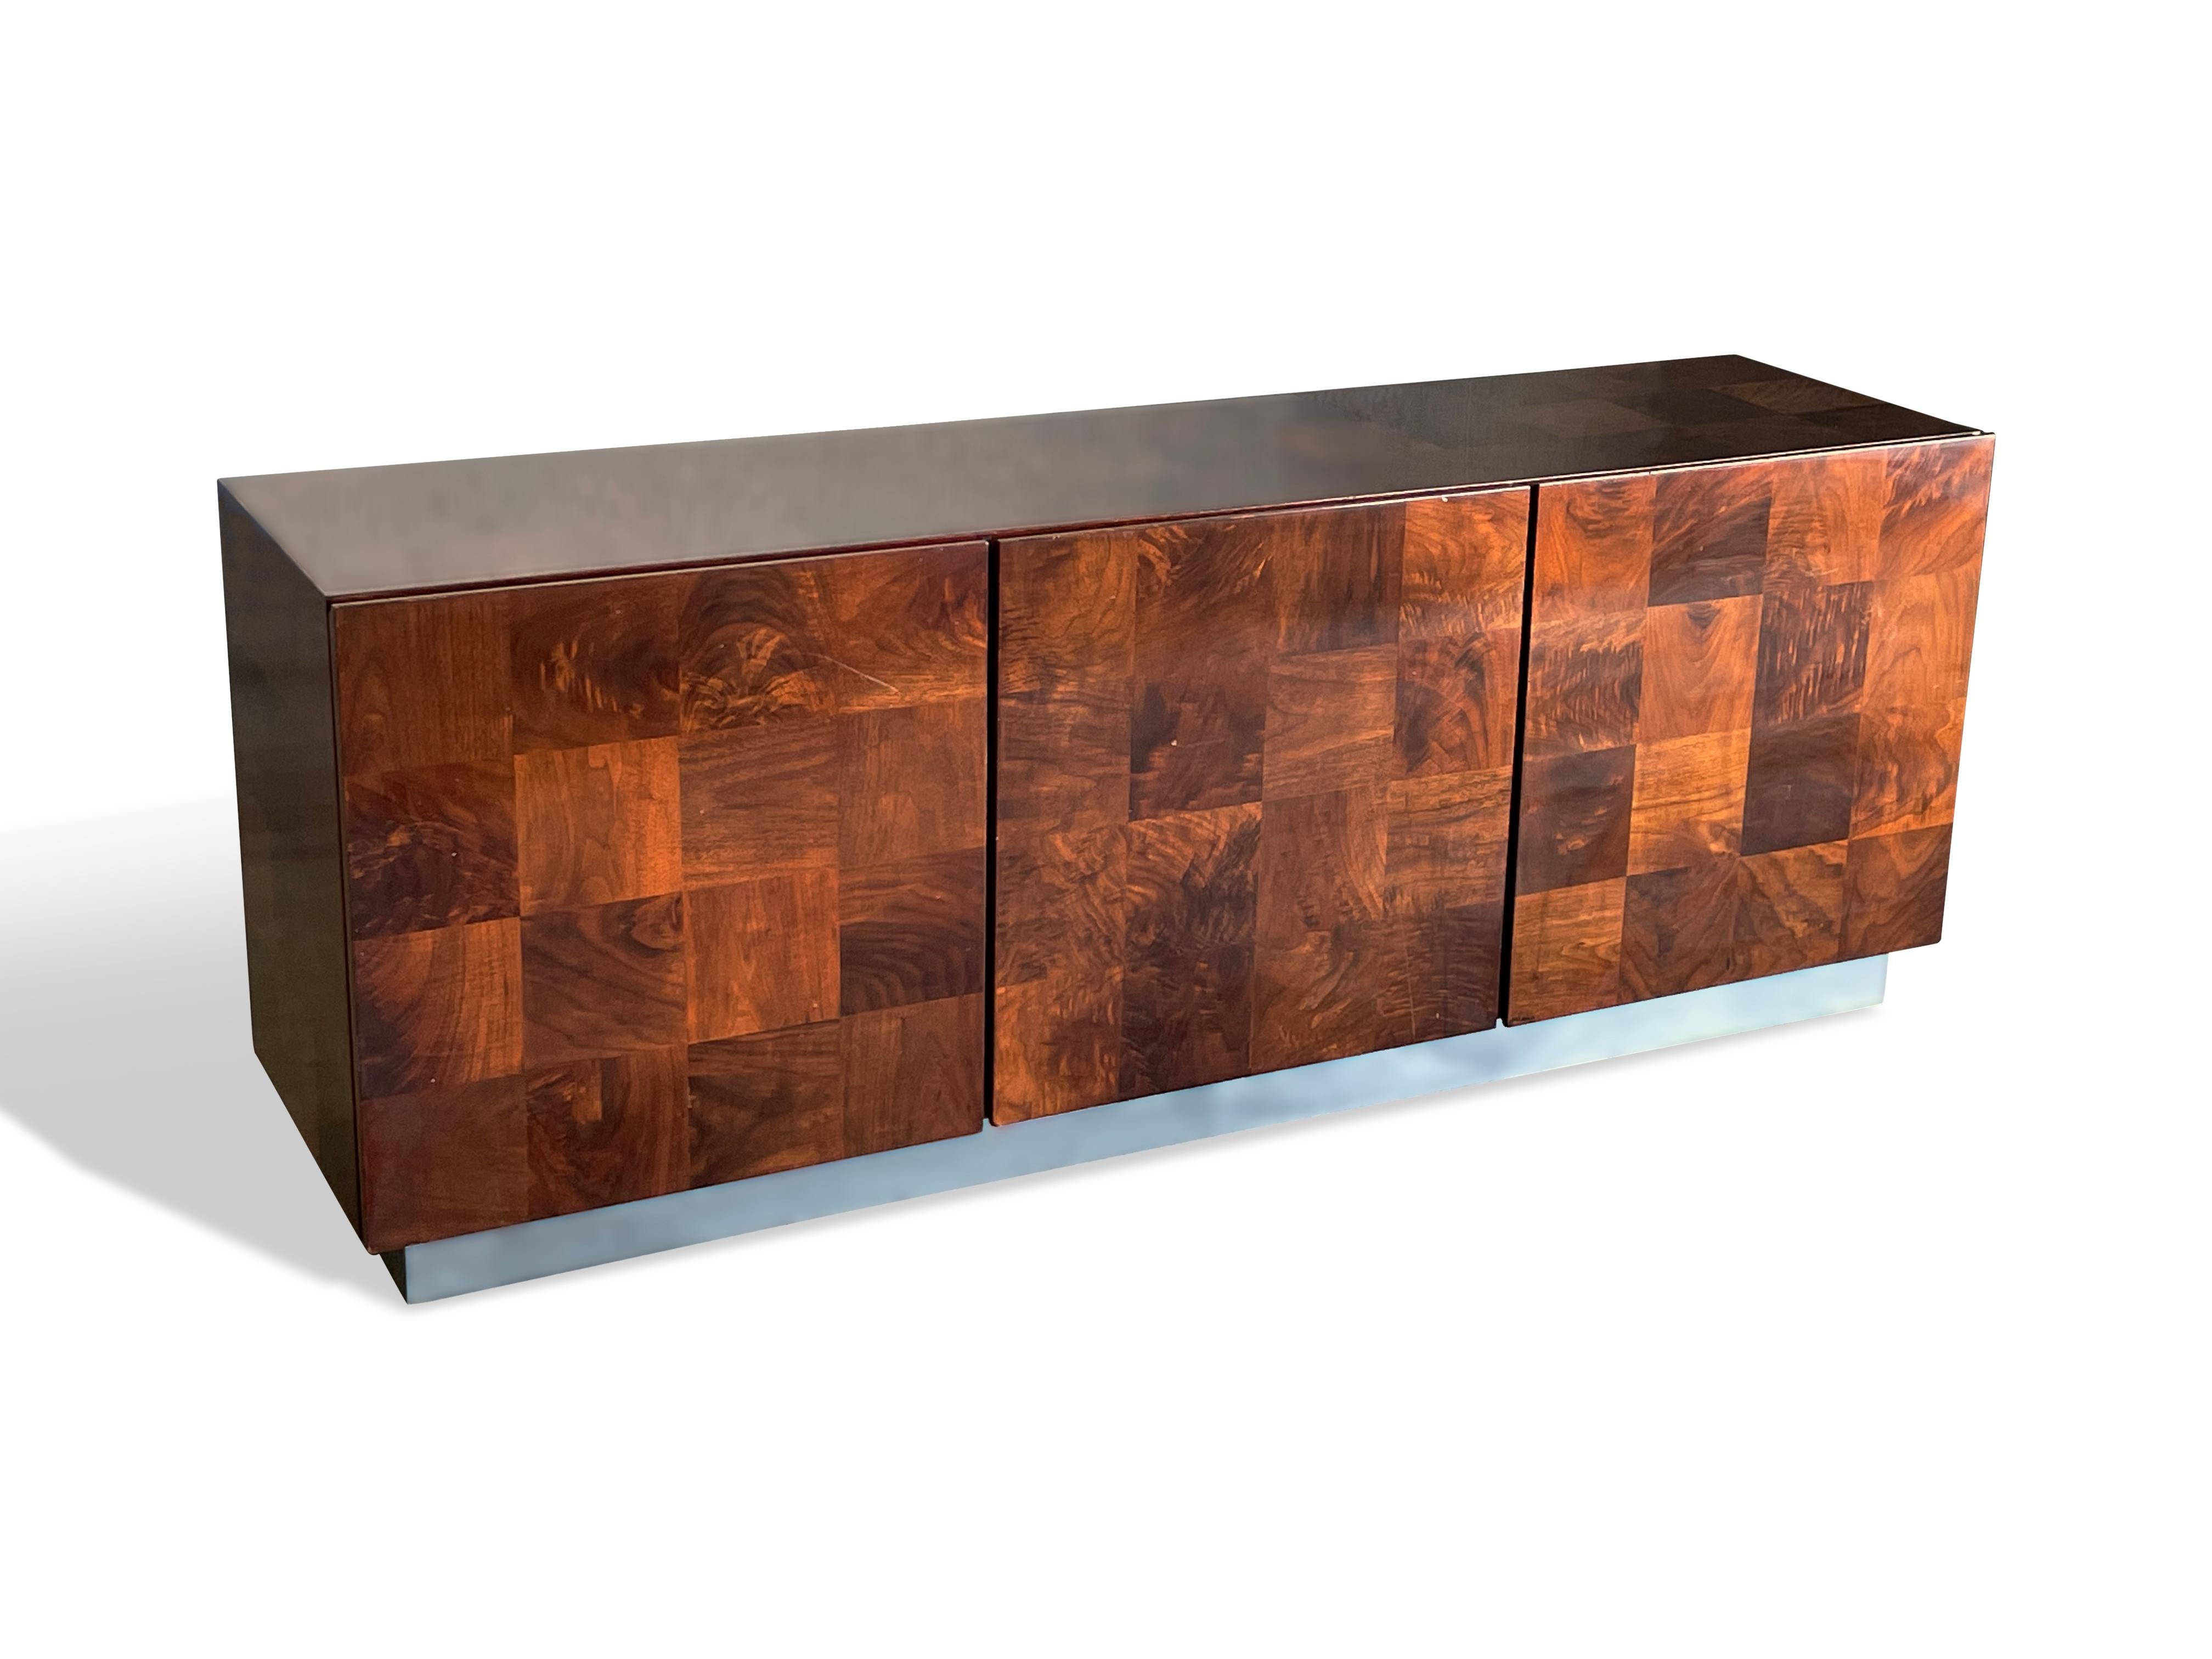 Patchwork credenza designed by Milo Baughman for Thayer Coggin 1970s
Burl wood in walnut with high gloss finish on a chrome plinth base
Left side features 4 drawers with two upper felt lined and a right side adjustable shelf
Signed to drawer interior